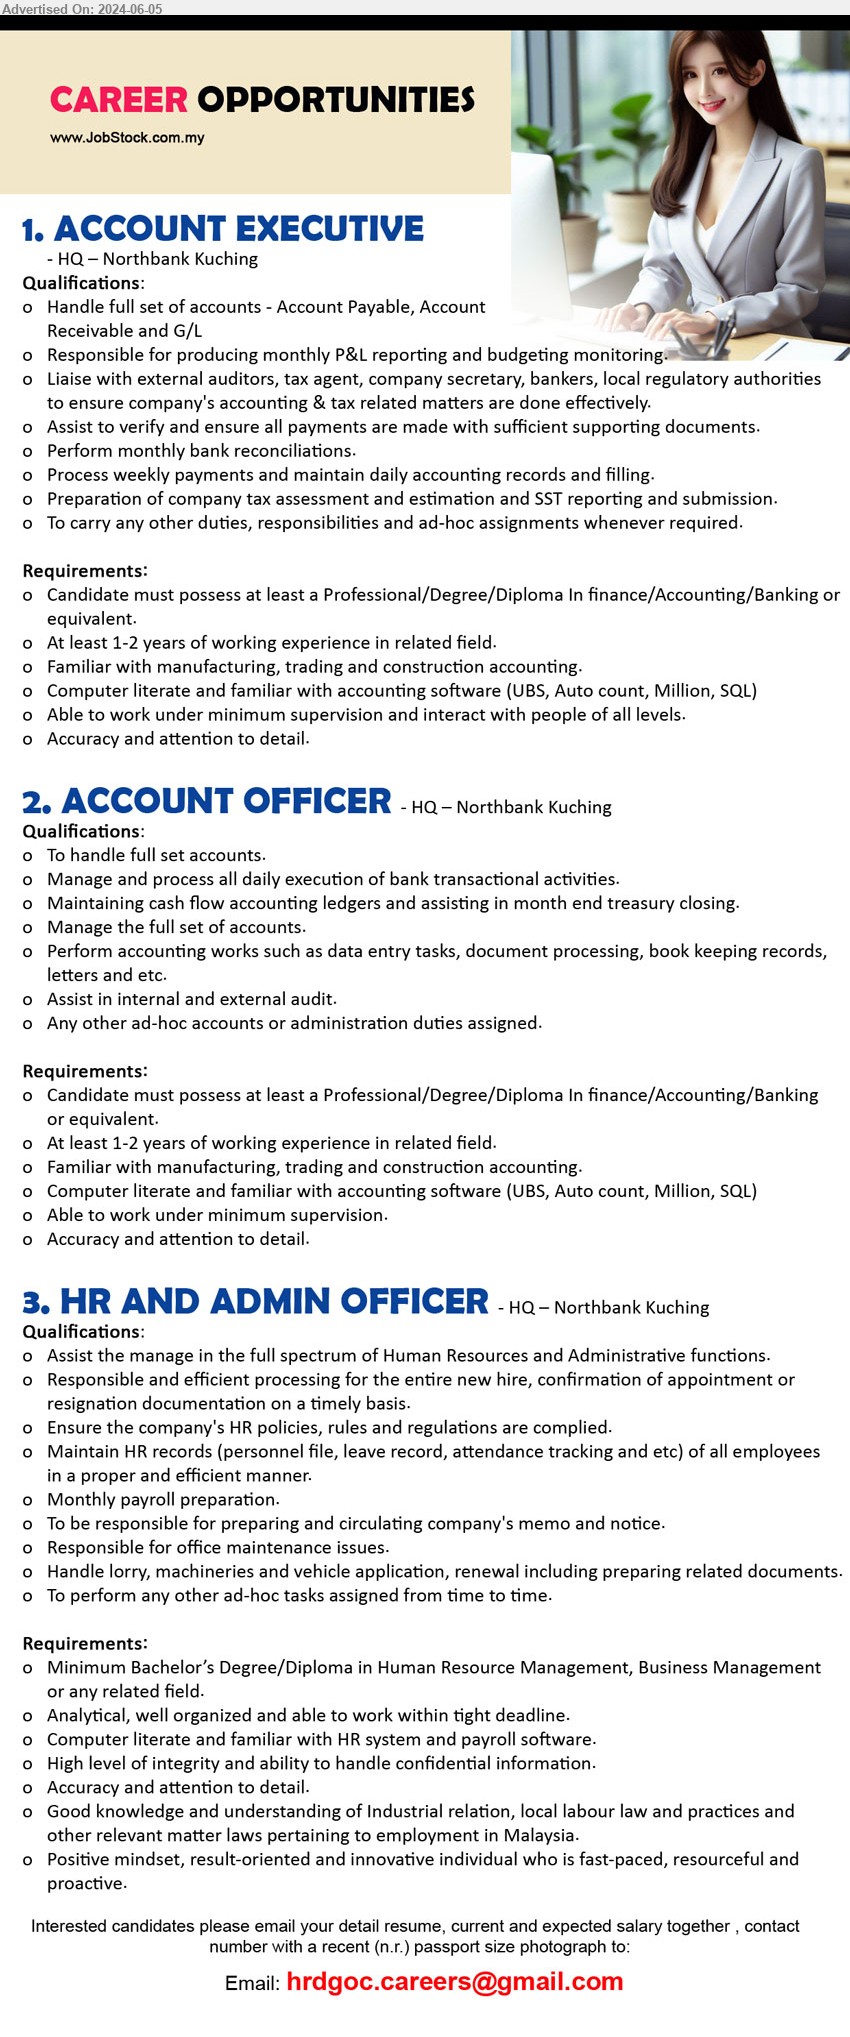 ADVERTISER - 1. ACCOUNT EXECUTIVE  (Kuching), Professional/Degree/Diploma In Finance/Accounting/Banking ,...
2. ACCOUNT OFFICER  (Kuching), Professional/Degree/Diploma In Finance/Accounting/Banking,...
3. HR AND ADMIN OFFICER (Kuching), Bachelor’s Degree/Diploma in Human Resource Management, Business Management ,...
Email resume to ...